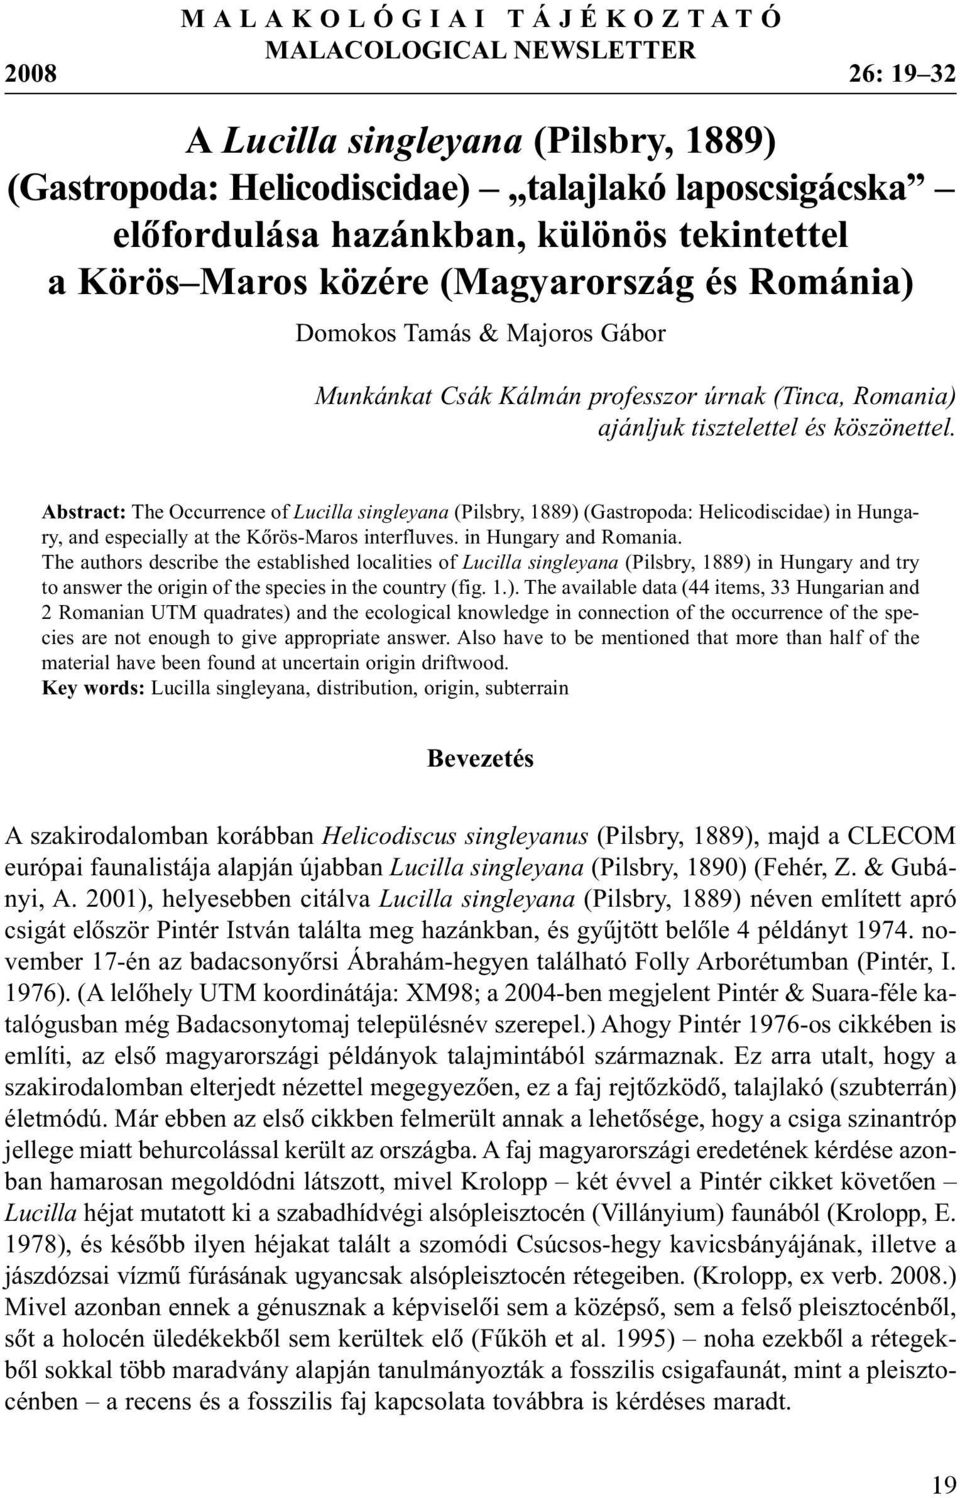 Abstract: The Occurrence of Lucilla singleyana (Pilsbry, 1889) (Gastropoda: Helicodiscidae) in Hungary, and especially at the Kõrös-Maros interfluves. in Hungary and Romania.